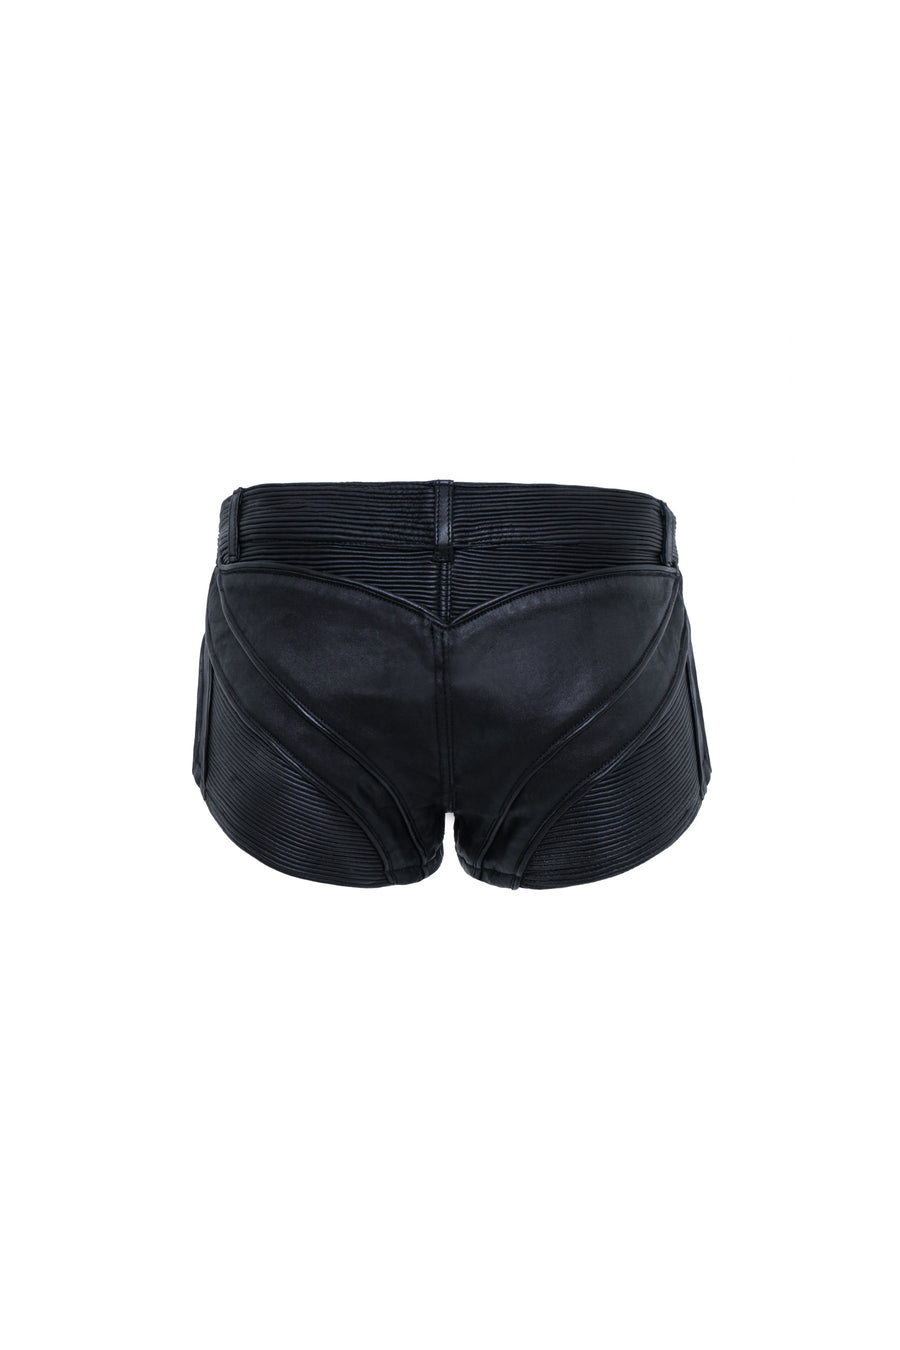 womens unisex textured booty shorts hot pants leather piping rib patches grunge texture